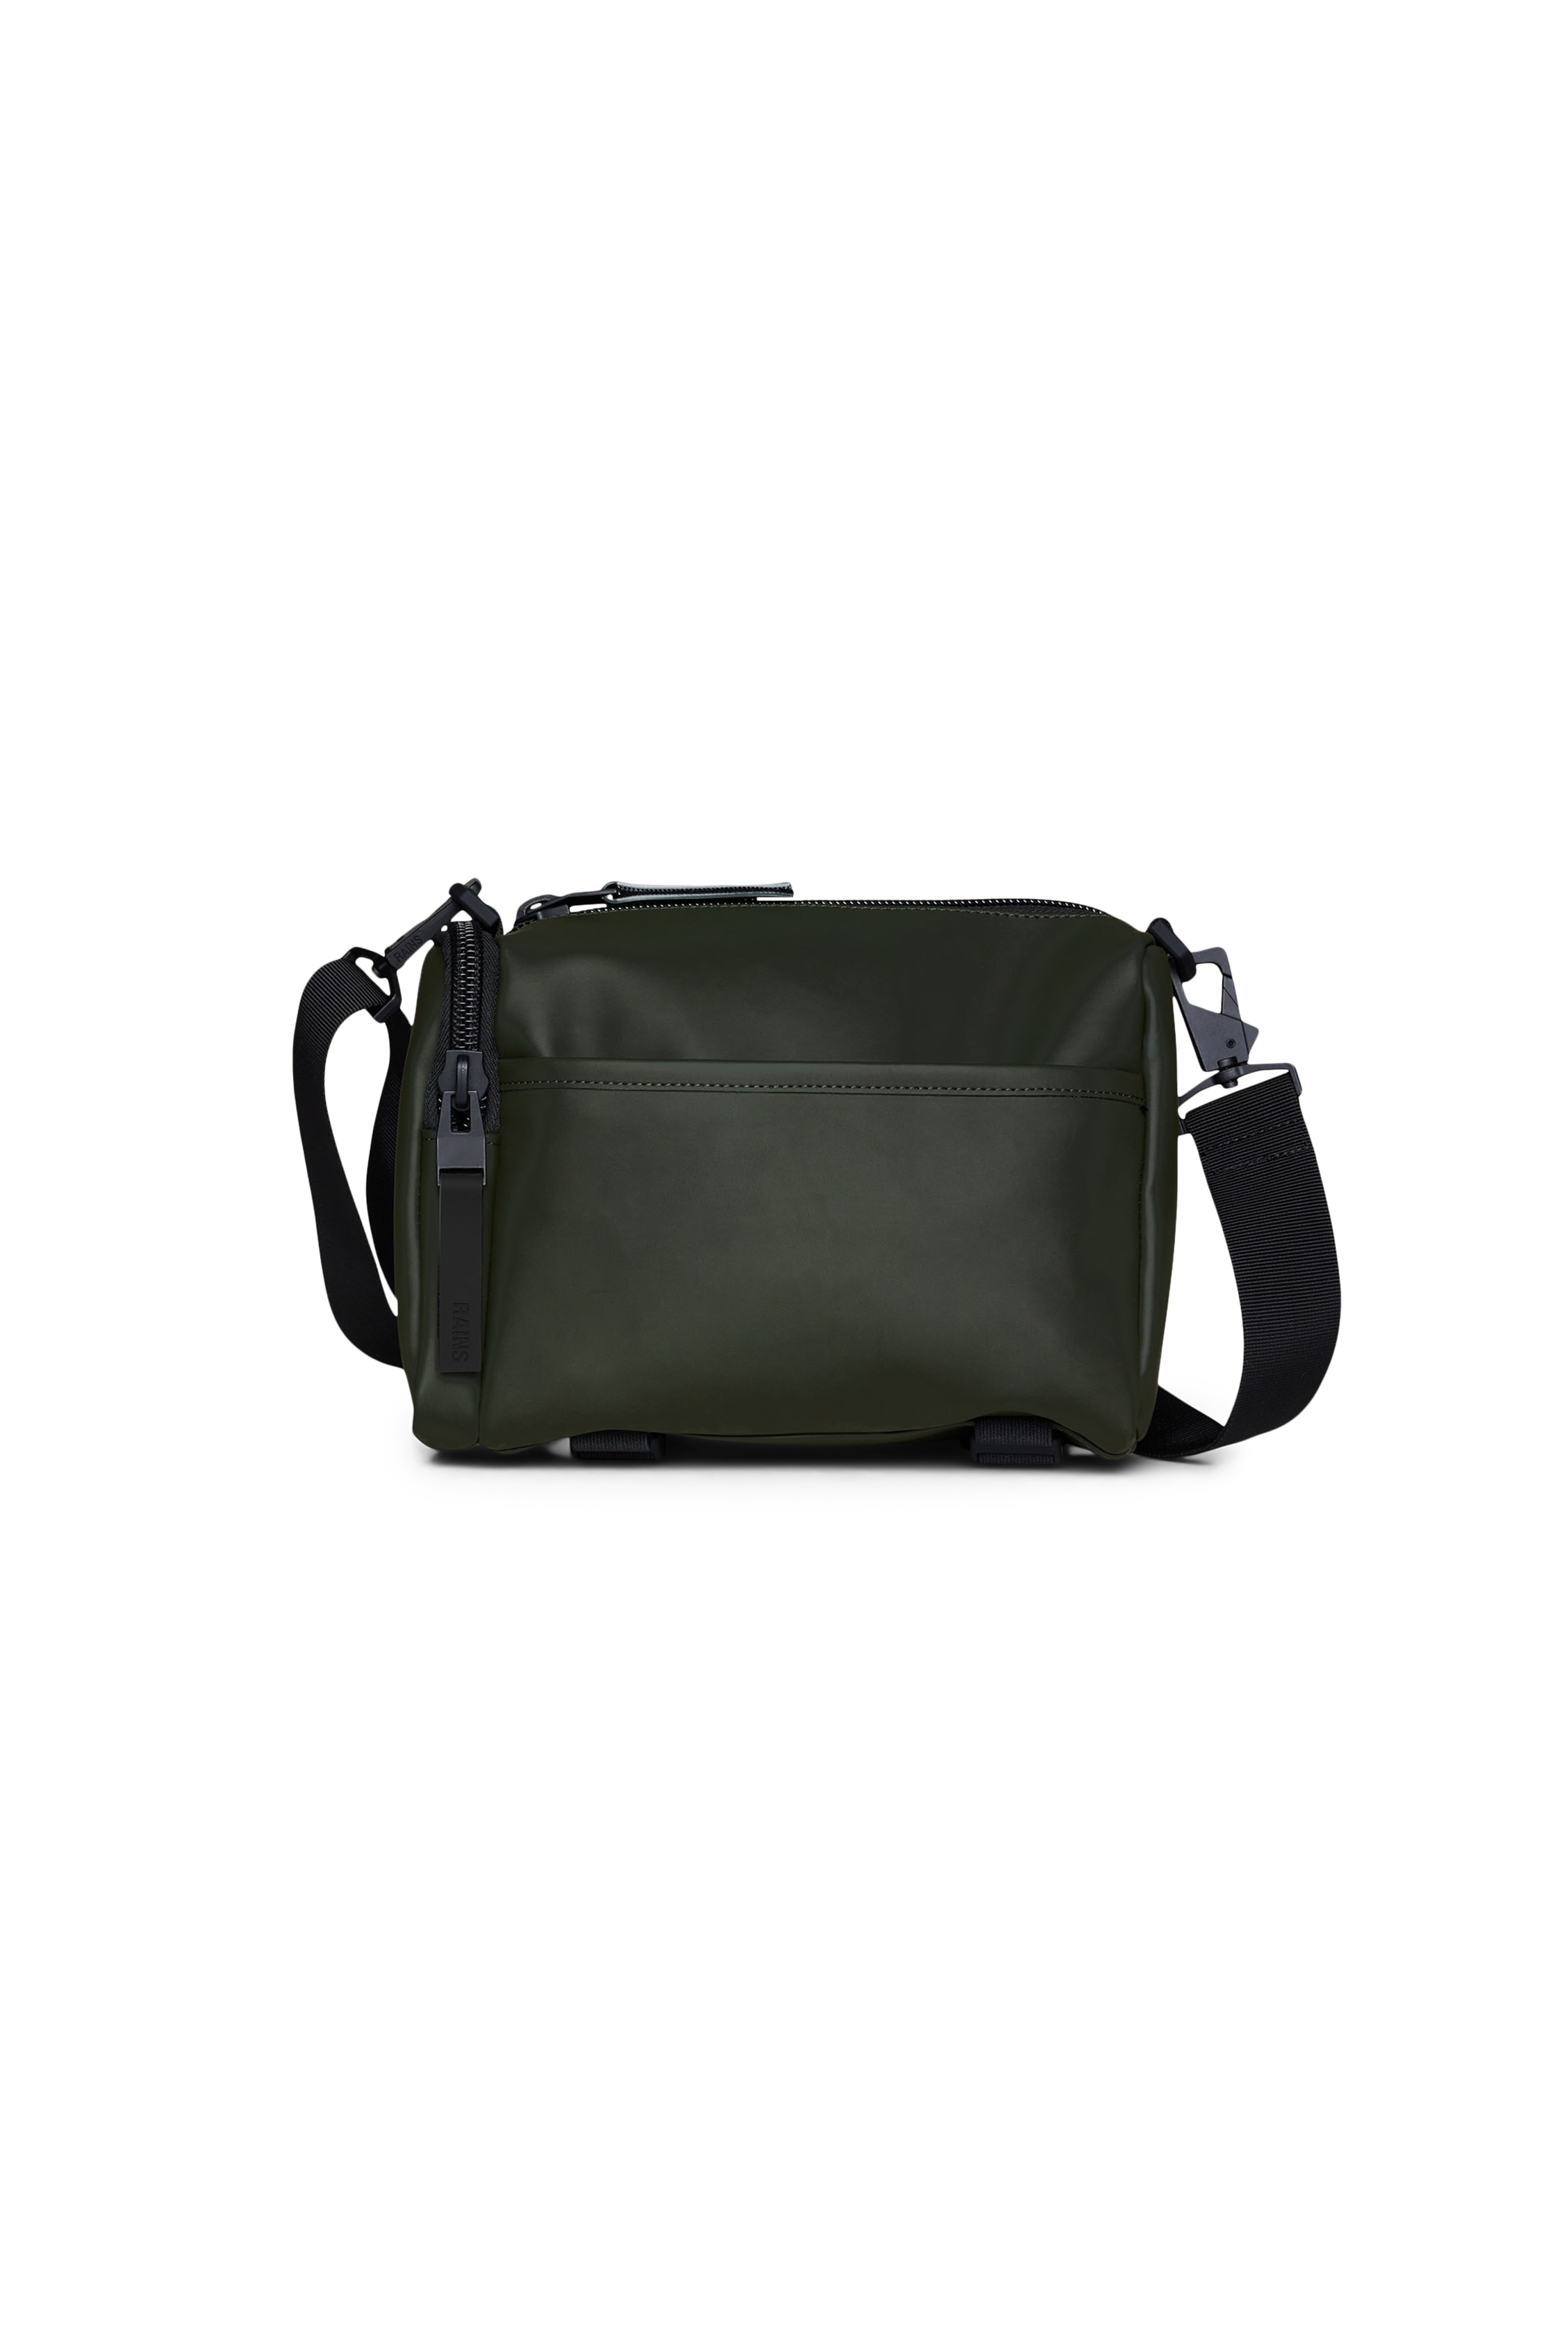 Rains® Texel Crossbody Bag in Green for $125 | Free Shipping